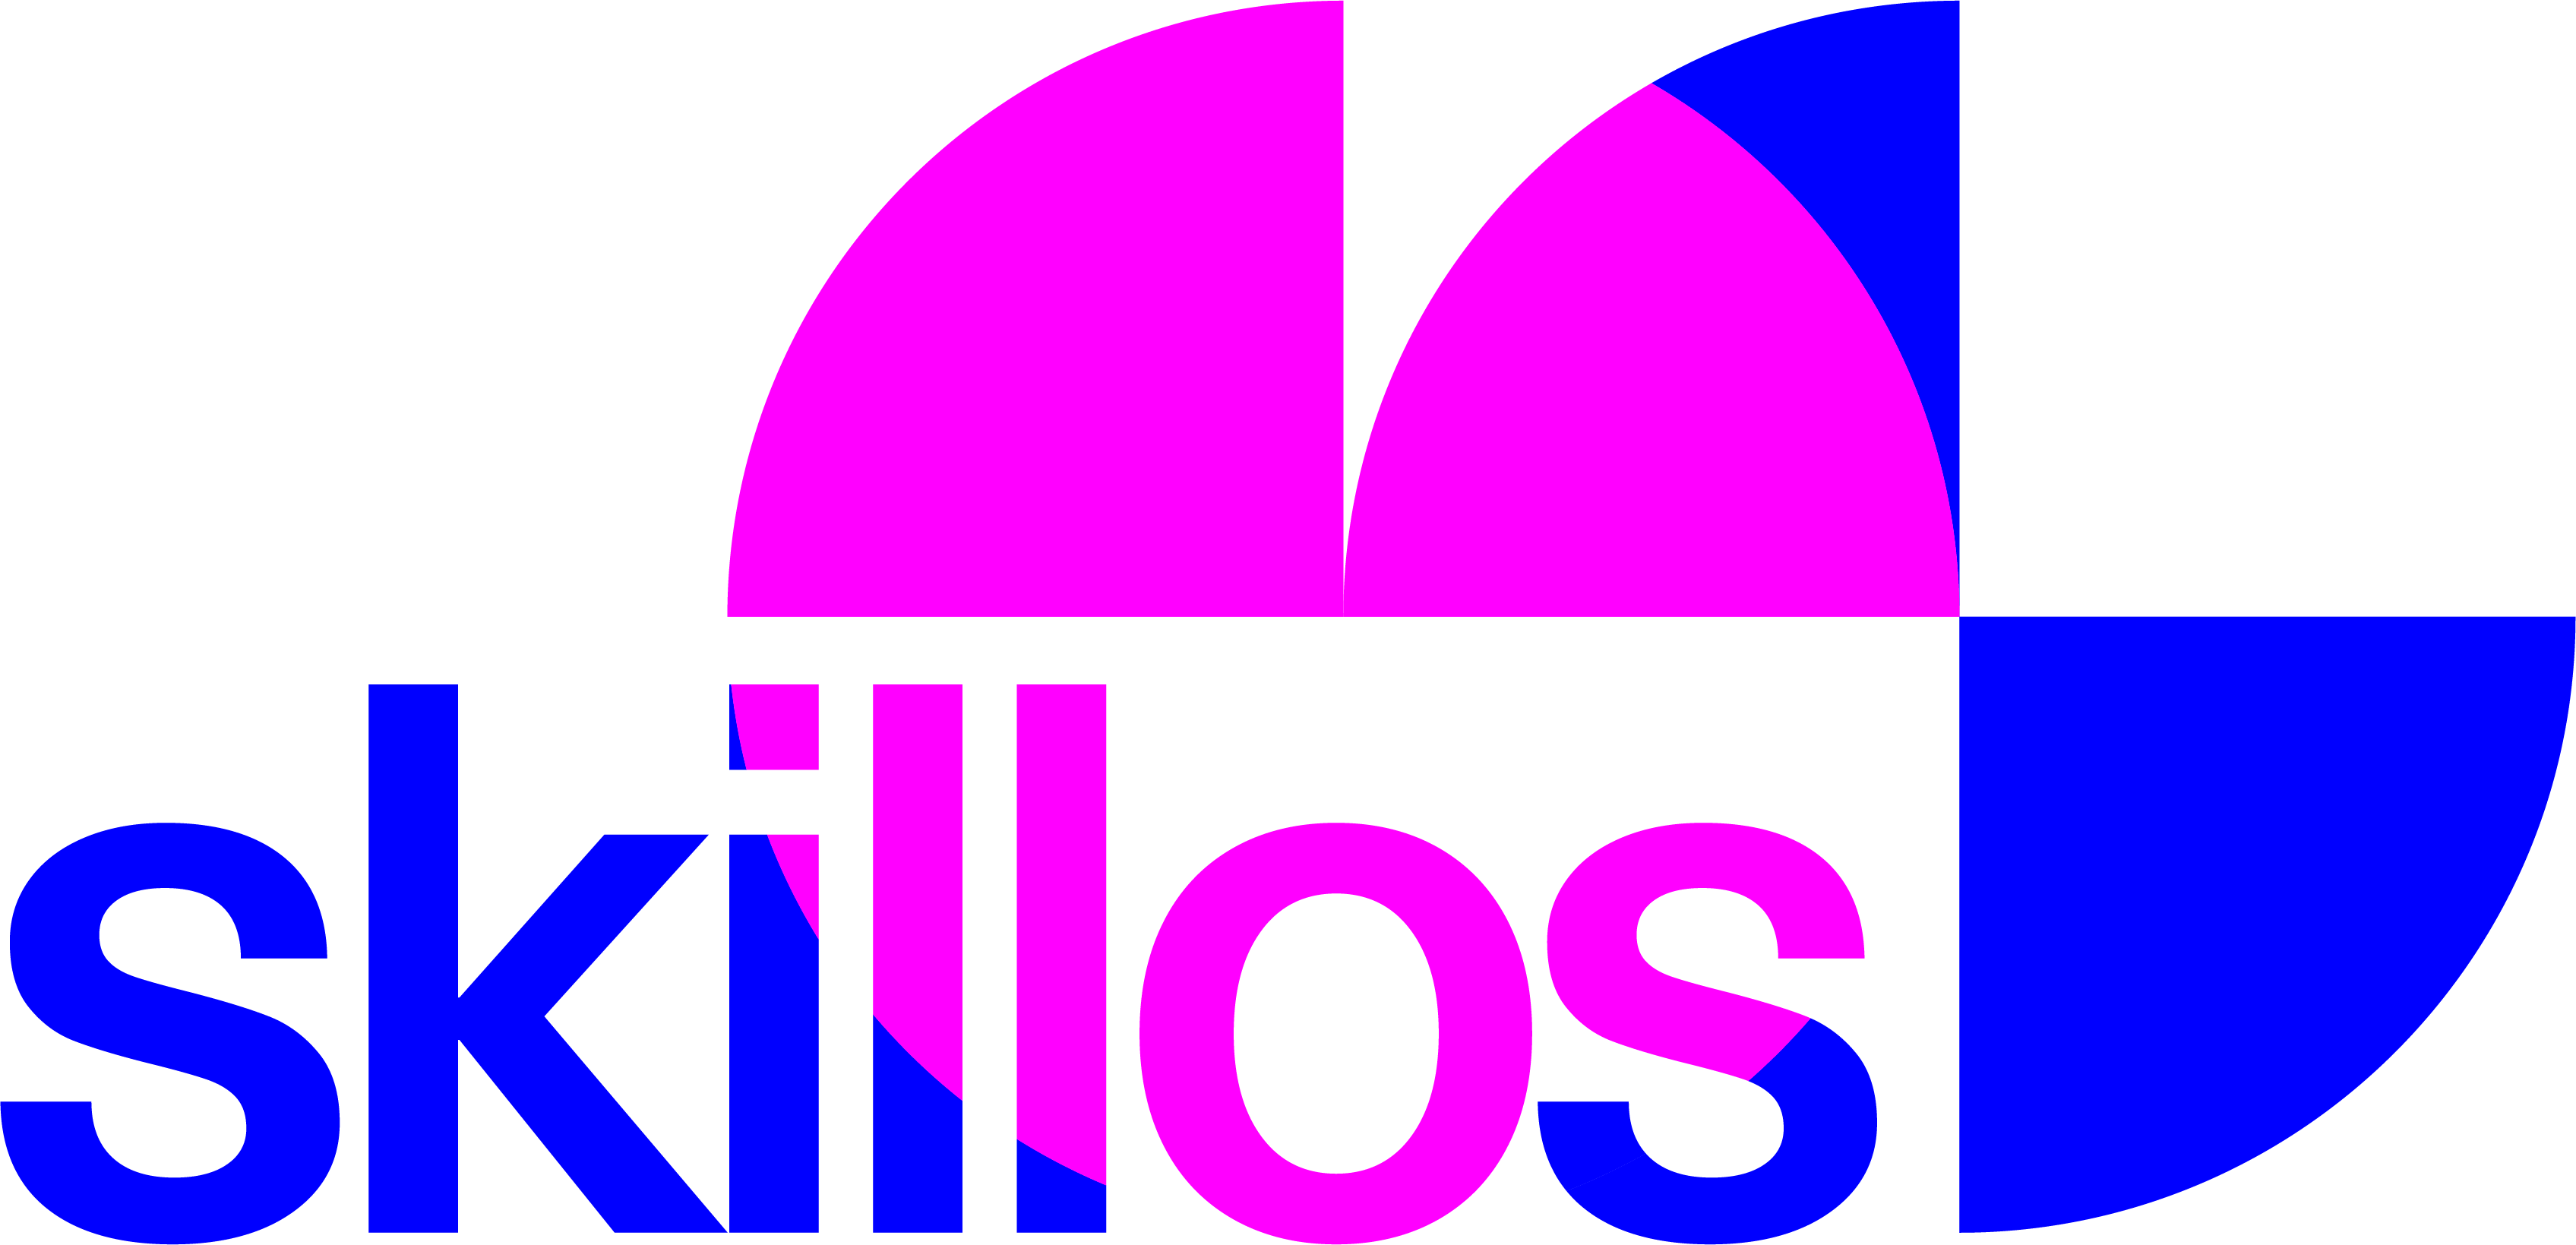 Skillos.Systems - Security Systems & Solutions